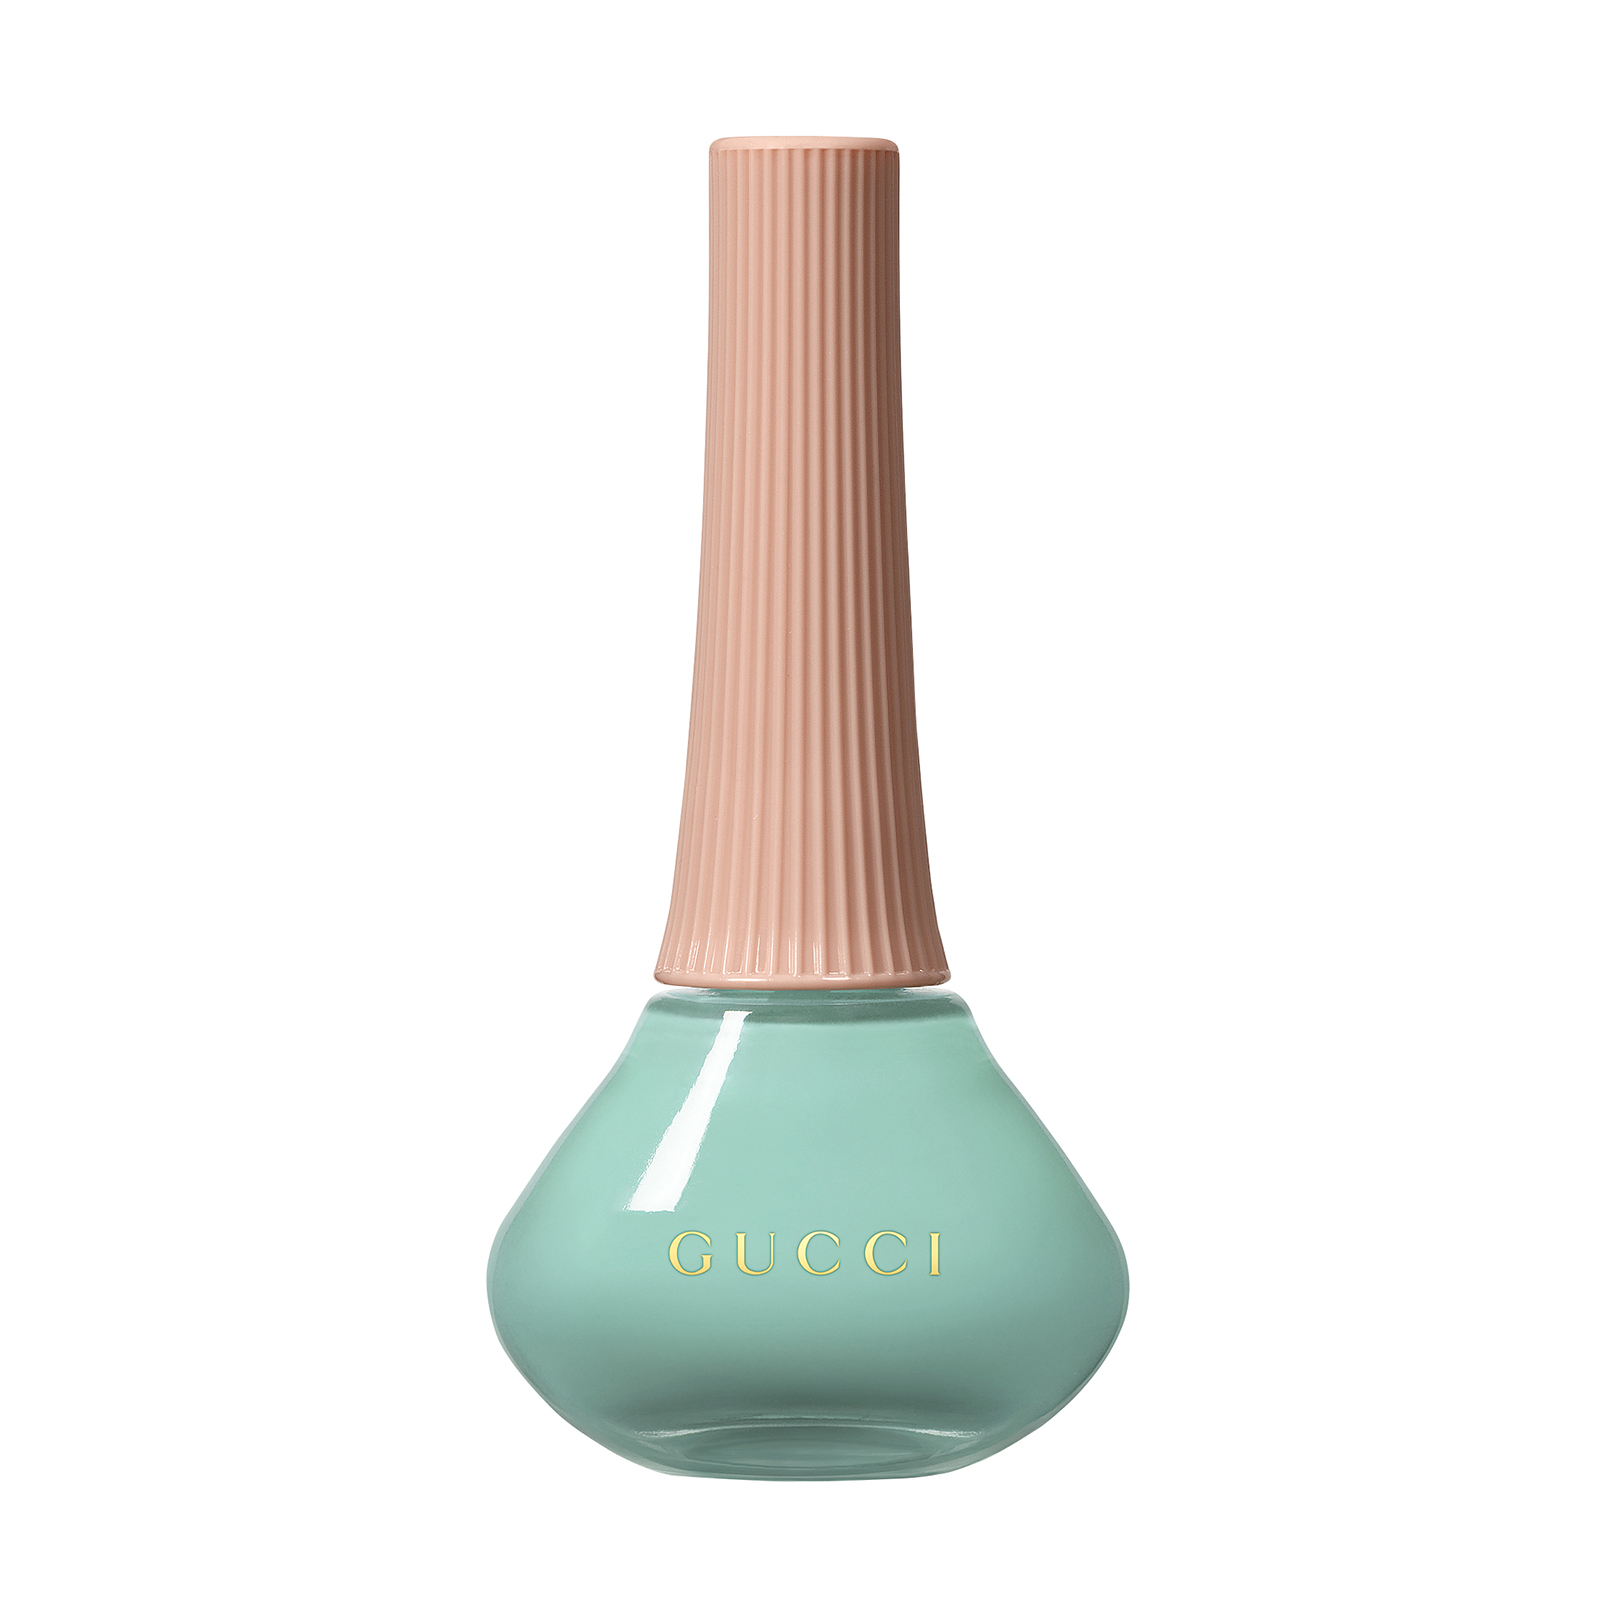 Gucci Vernis A Ongles Nail Polish 10Ml 713 Dorothy Turquoise